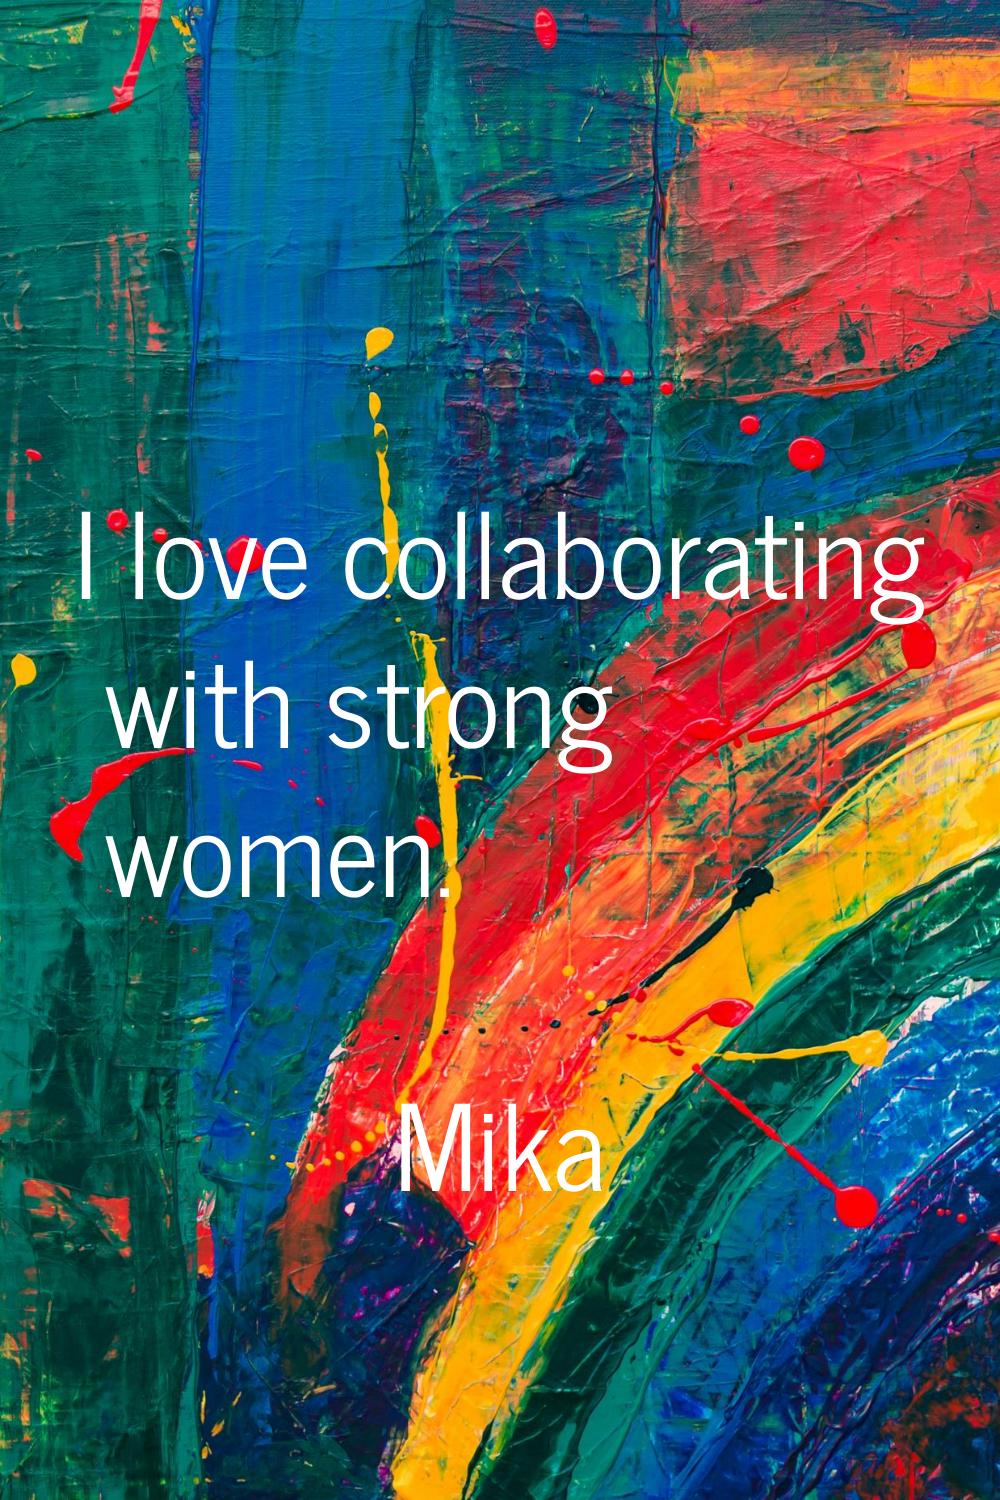 I love collaborating with strong women.